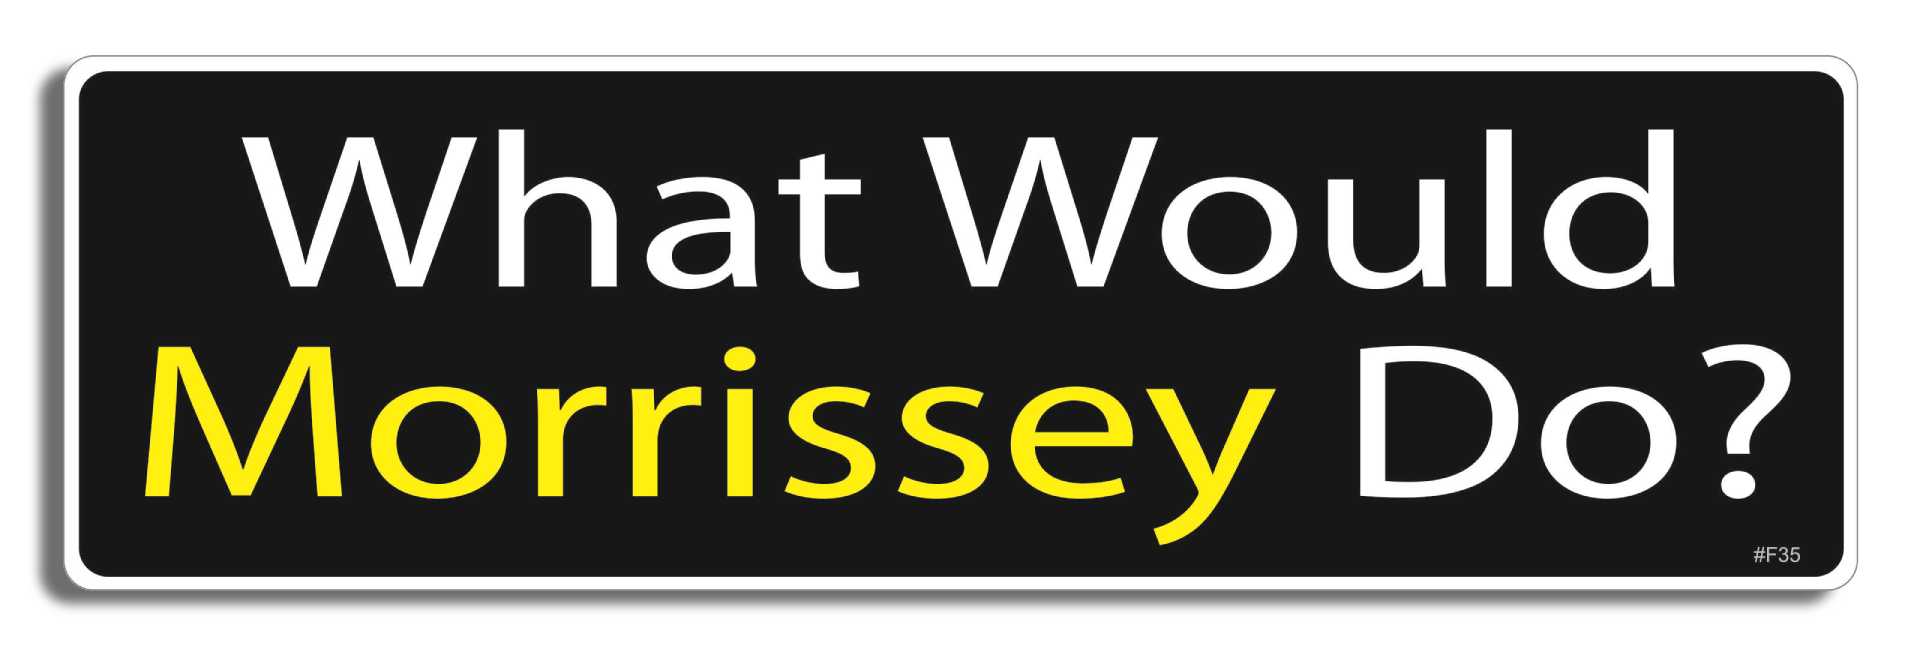 What would Morrissey do? - 3" x 10" Bumper Sticker--Car Magnet- -  Decal Bumper Sticker-funny Bumper Sticker Car Magnet What would Morrissey do?-  Decal for carsthe smiths